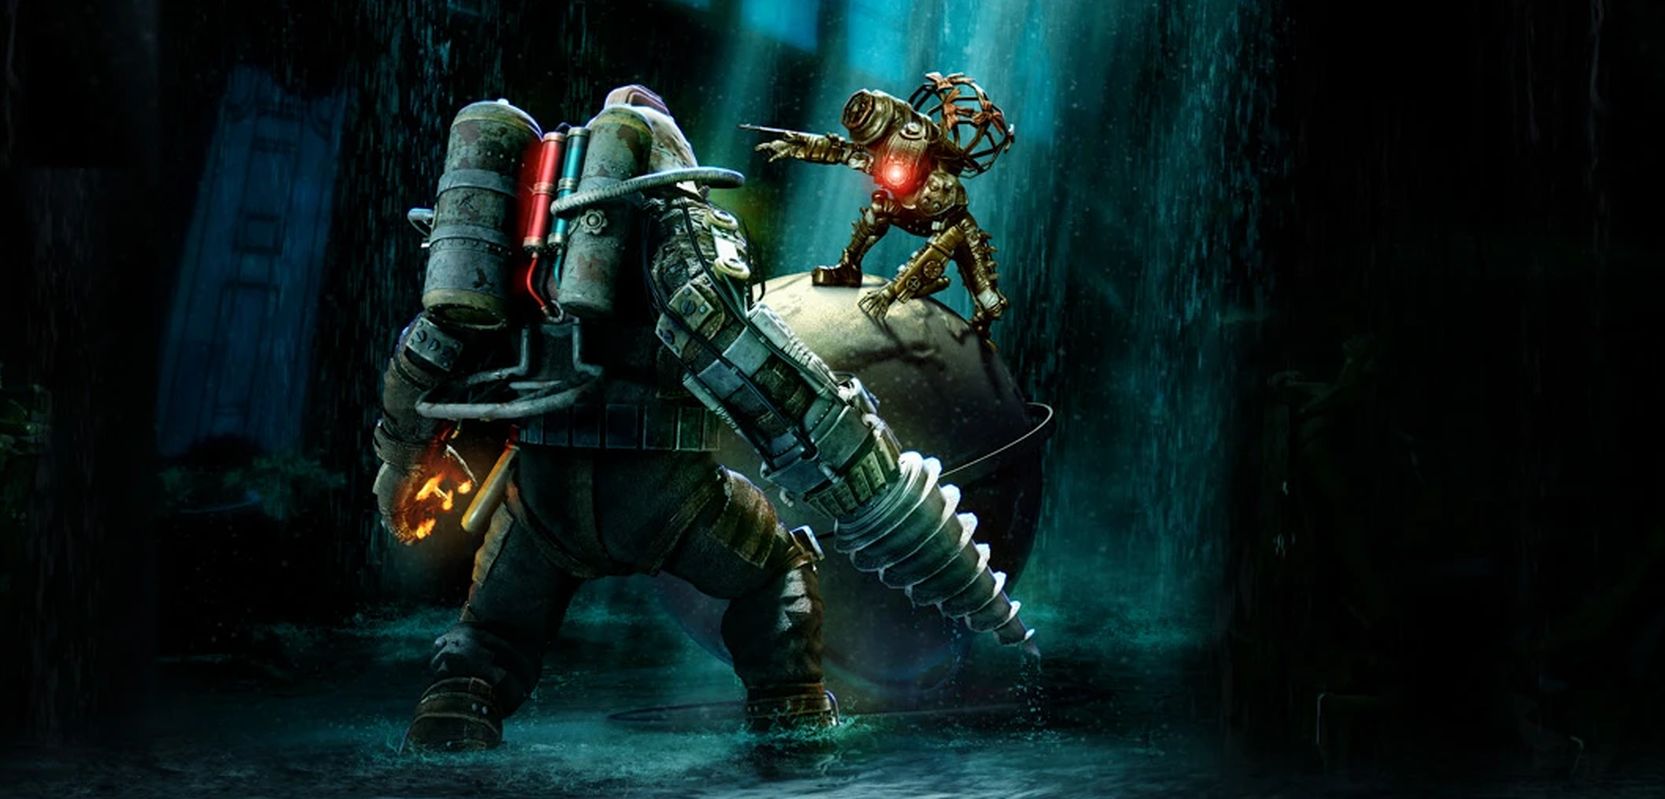 Image for BioShock: The Collection is this week's freebie on the Epic Games Store